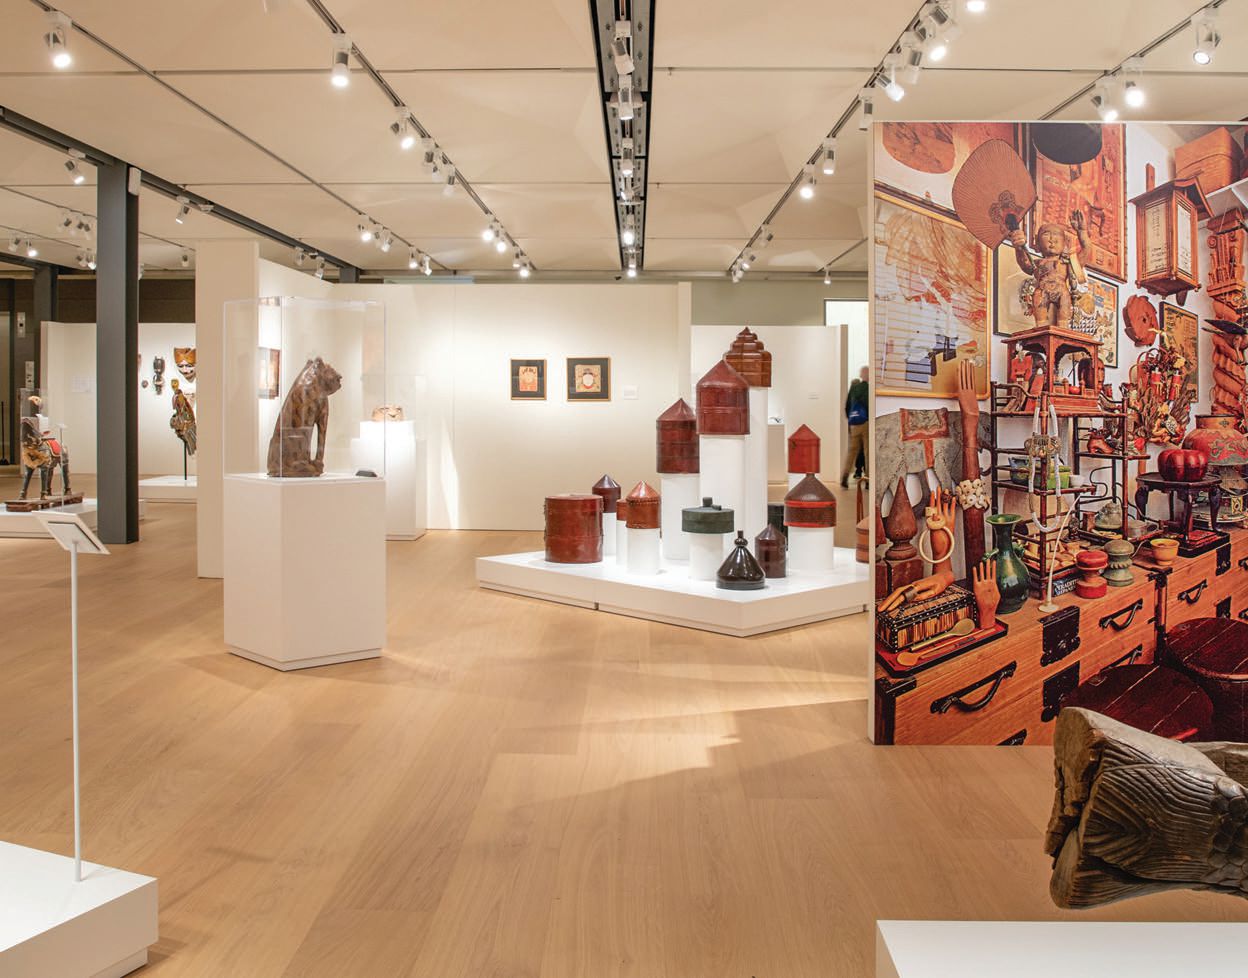 Global Spirit at Mingei International Museum features folk art from the Ted Cohen Collection PHOTO: COURTESY OF MINGEI INTERNATIONAL MUSEUM